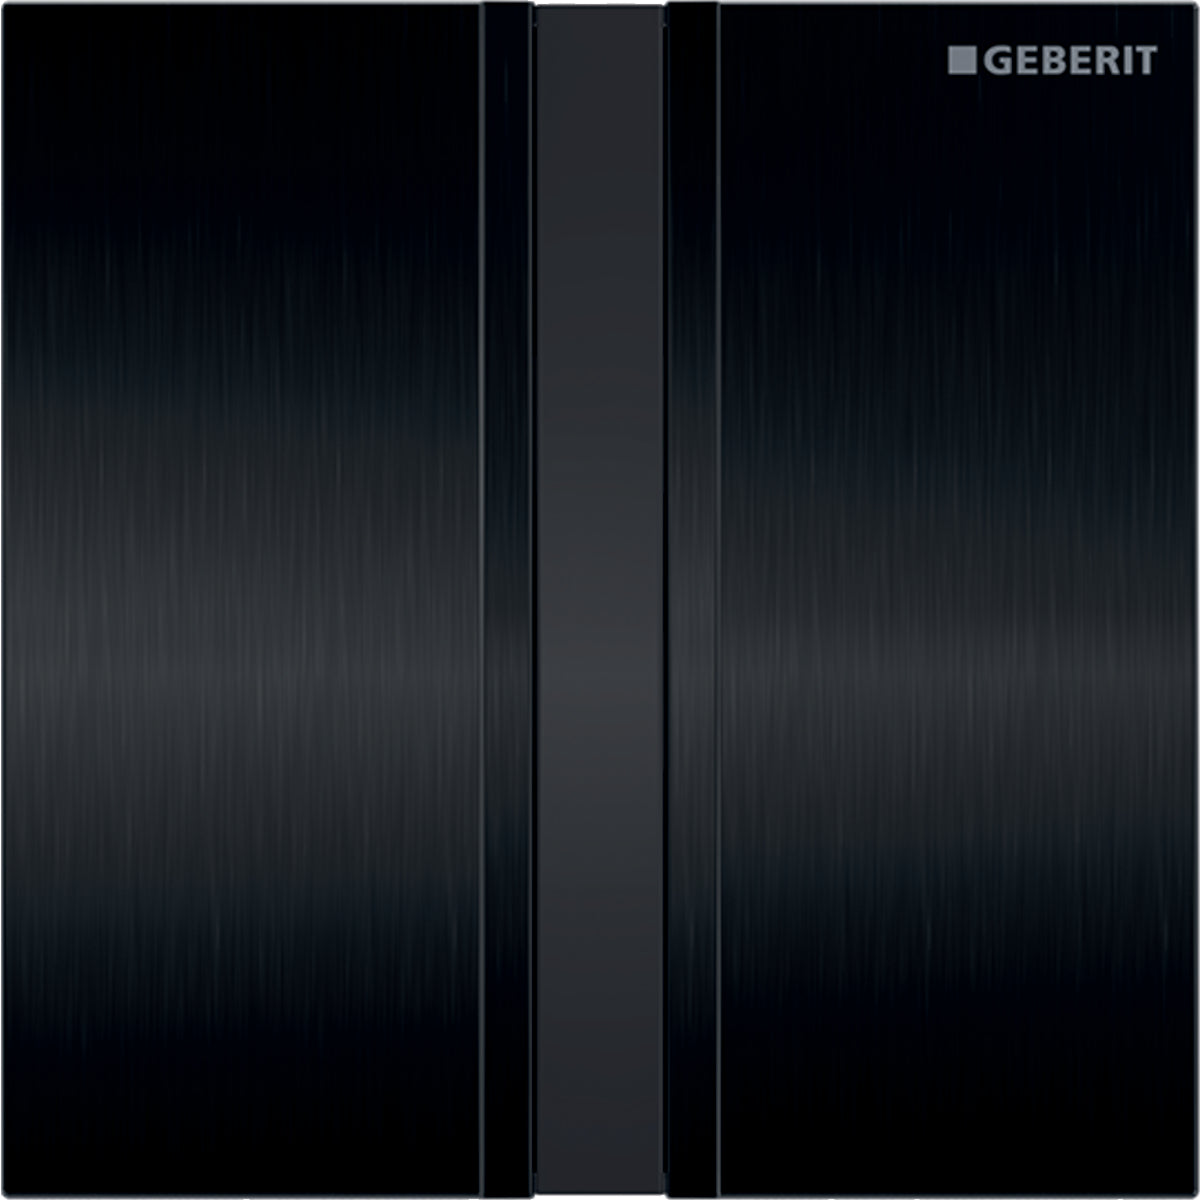 Geberit 116.036.QD.1- Geberit urinal flush control with electronic flush actuation, battery operation, cover plate type 50: black chrome / brushed, easy-to-clean coated - FaucetExpress.ca